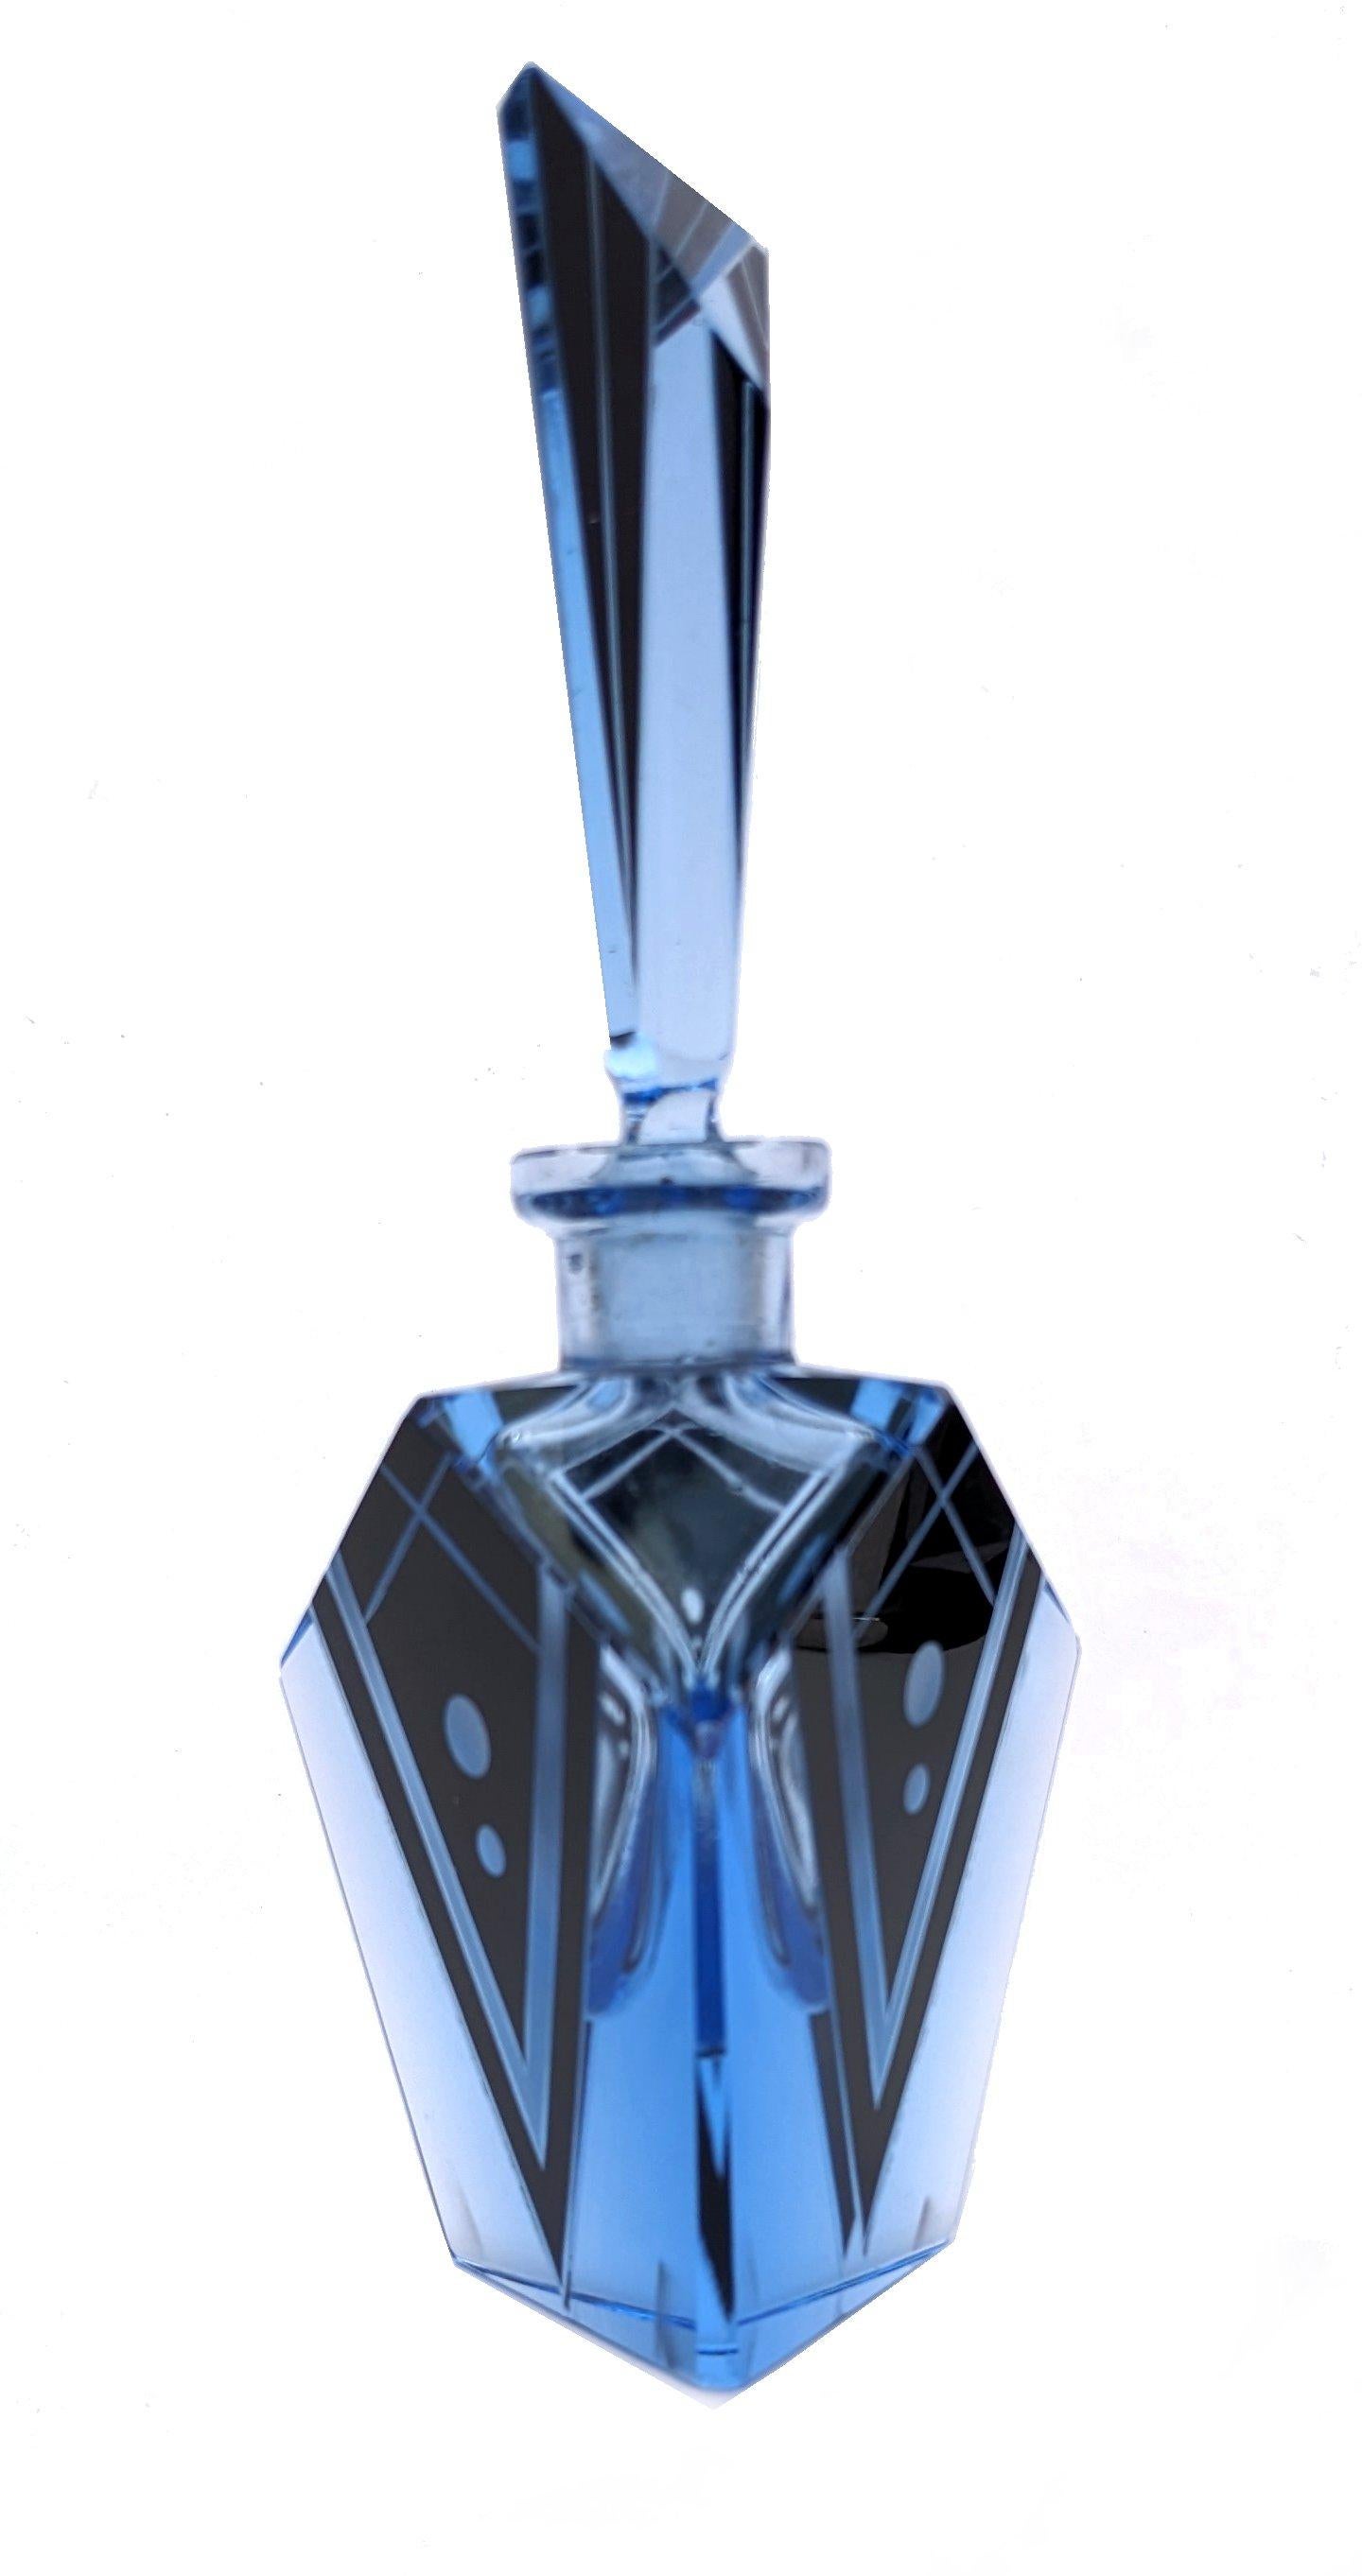 Stunning Art Deco blue glass perfume scent bottle with black enamel geometric decoration. Beautiful deep blue glass, very collectable dating from the 1930s. Czech in origin. Superb black enamelled geometric design with etched glass detailing.